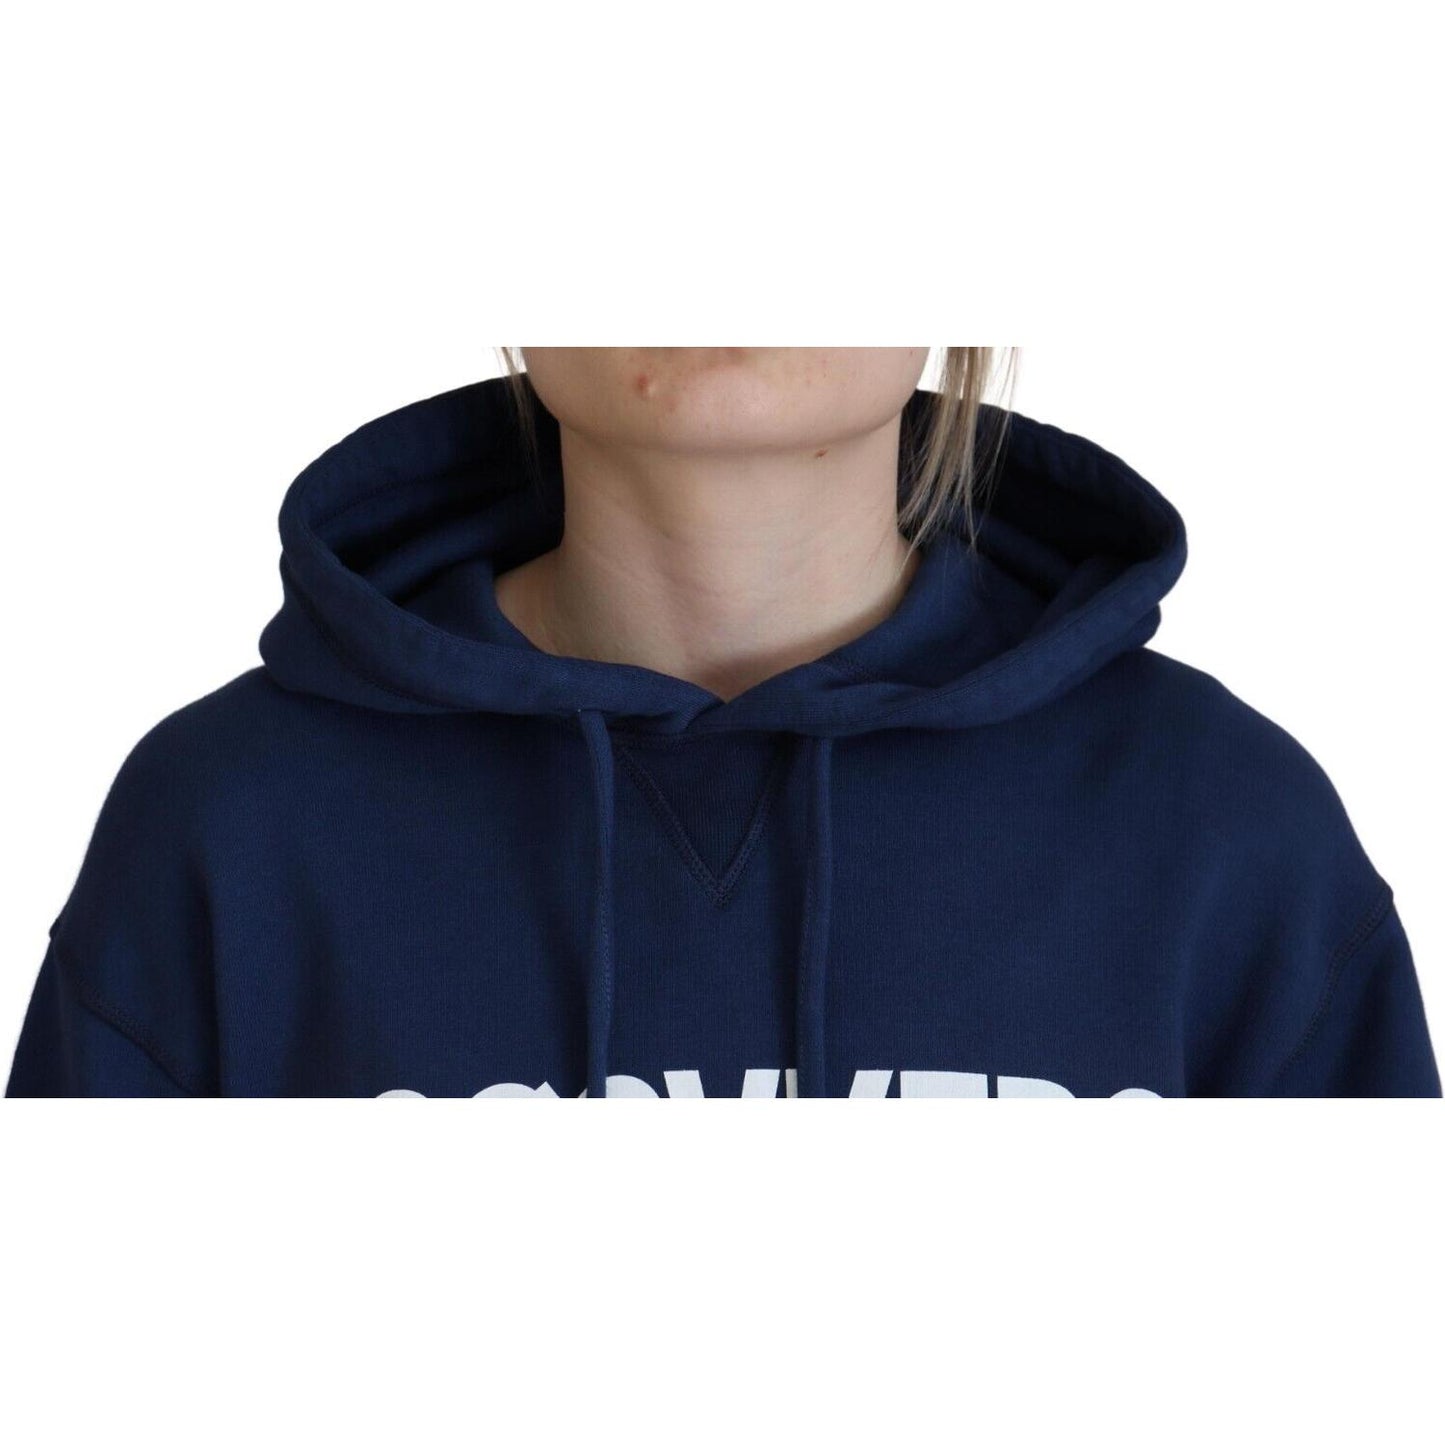 Dsquared² Blue Logo Printed Hooded Women Long Sleeve Sweater blue-logo-printed-hooded-women-long-sleeve-sweater